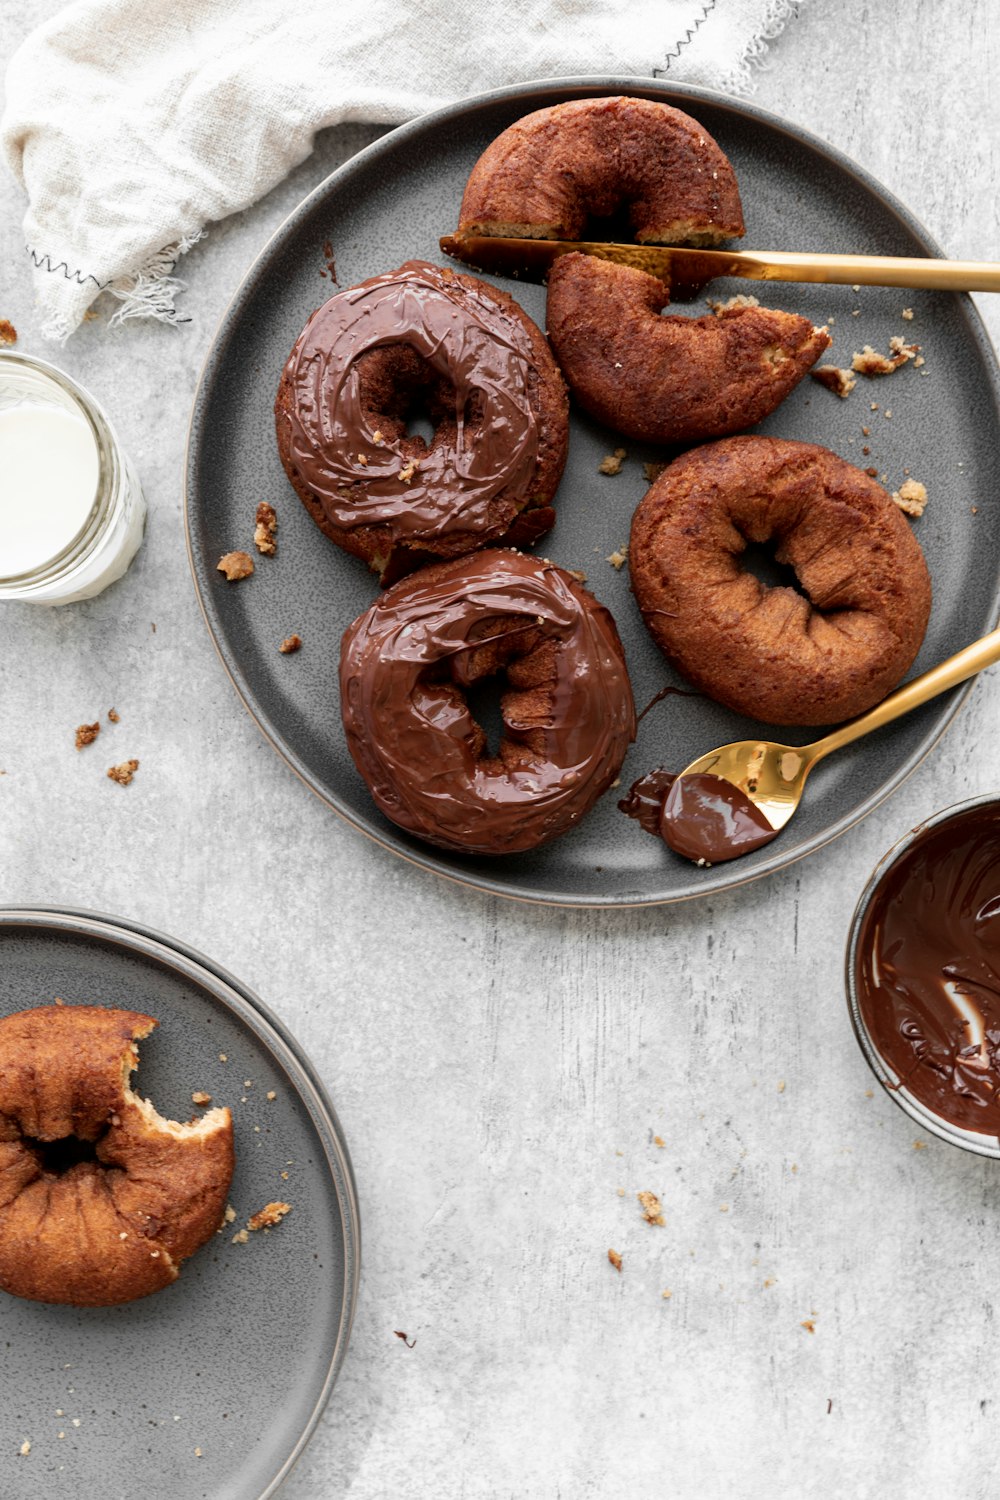 a plate of doughnuts with chocolate frosting